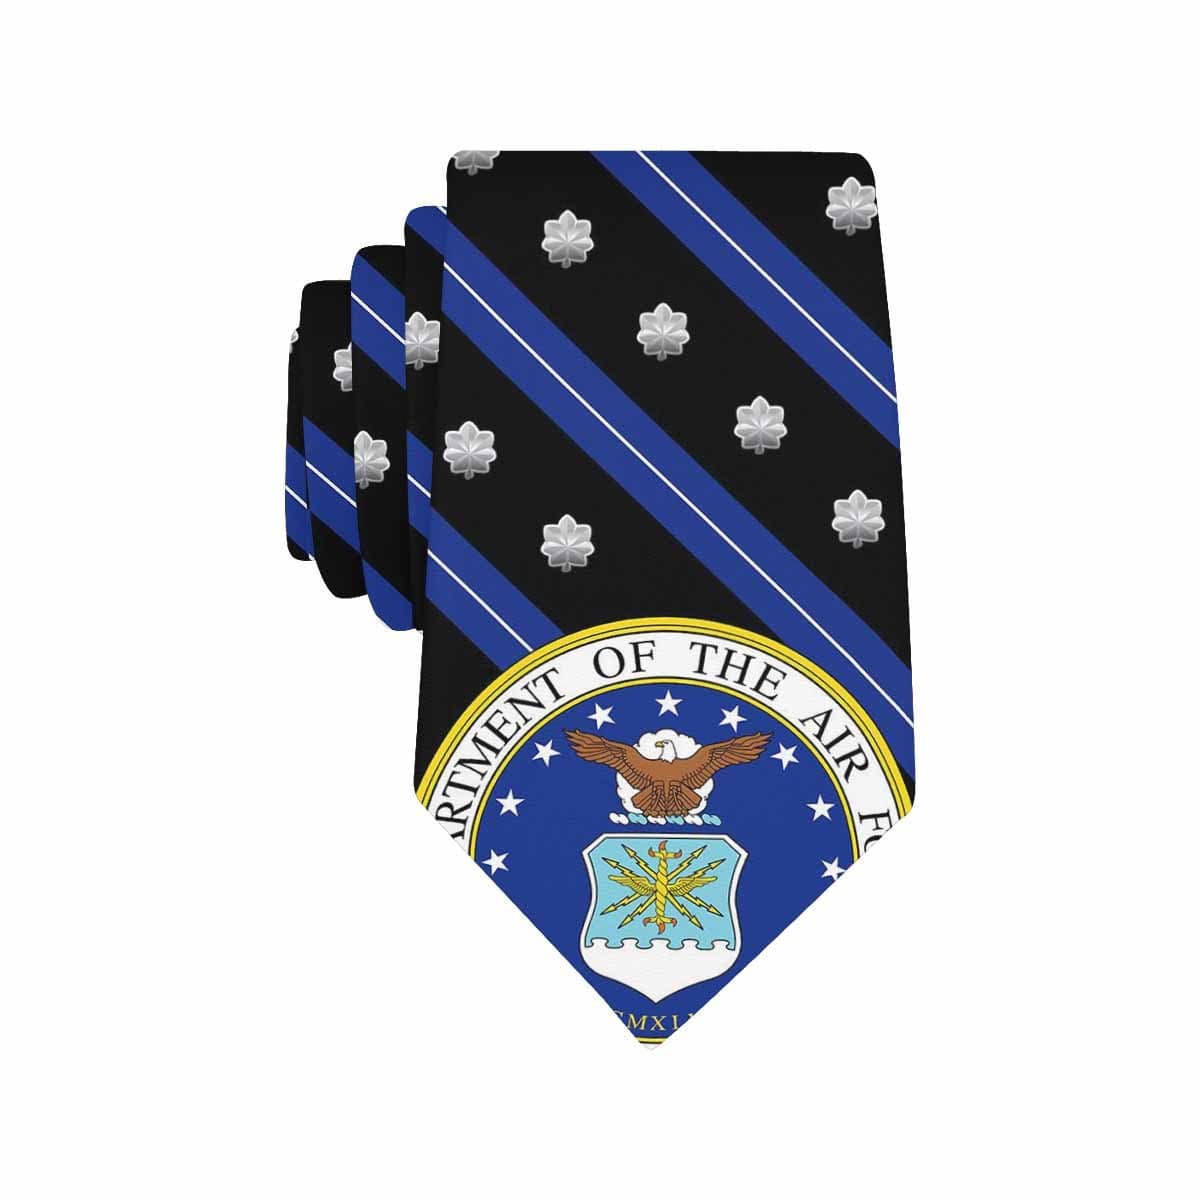 US Air Force O-5 Classic Necktie (Two Sides)-Necktie-USAF-Ranks-Veterans Nation